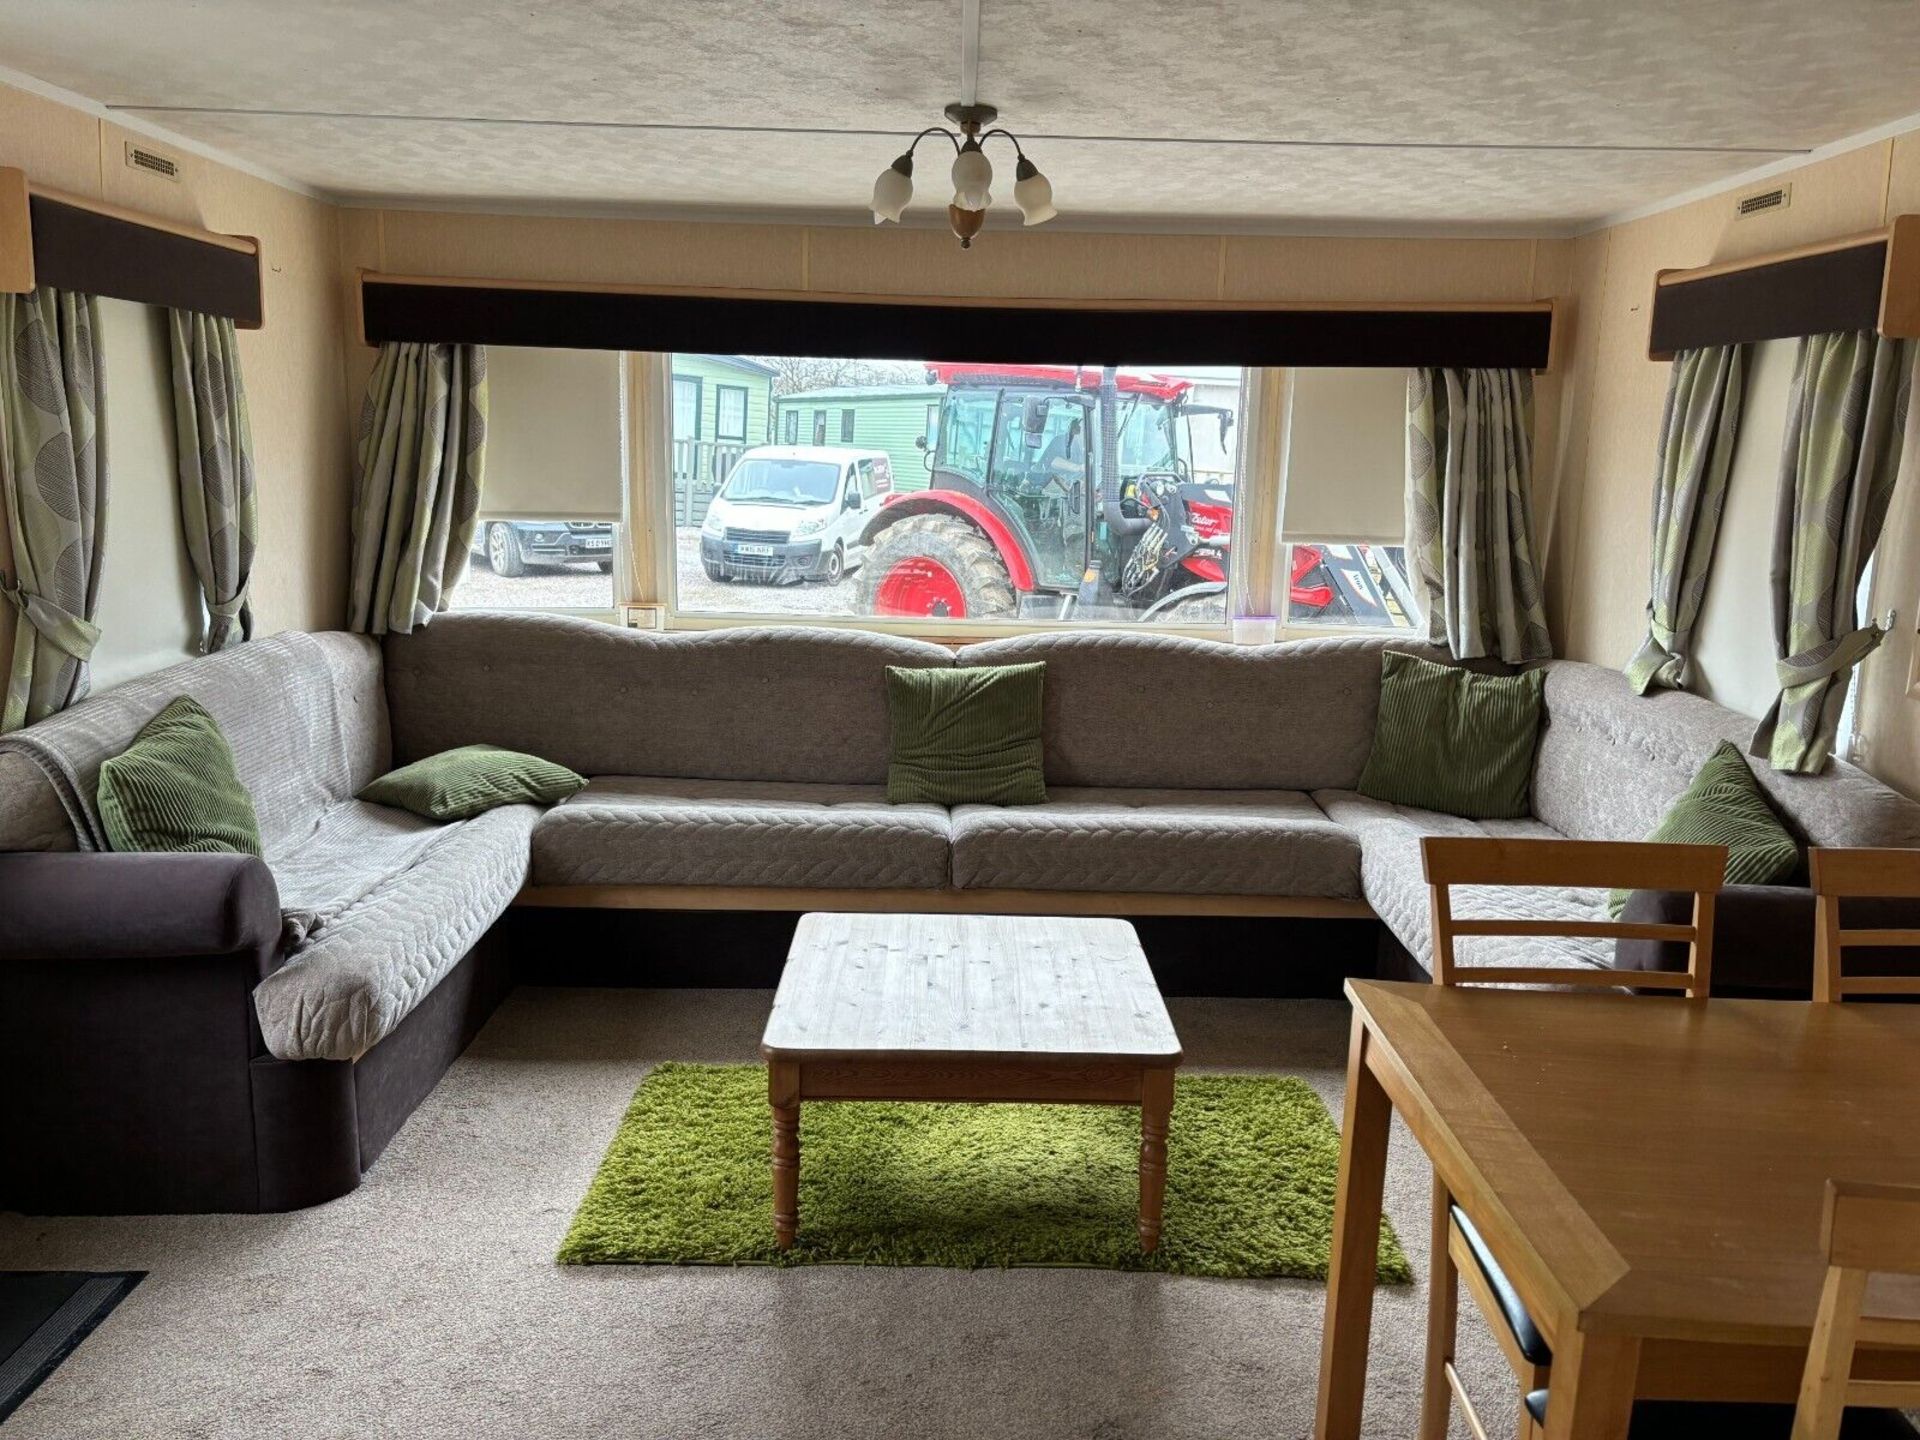 EMBRACE COMFORT AND STYLE WITH THE ABI ARIZONA - 36X12, 3 BEDROOM STATIC CARAVAN - Image 17 of 18